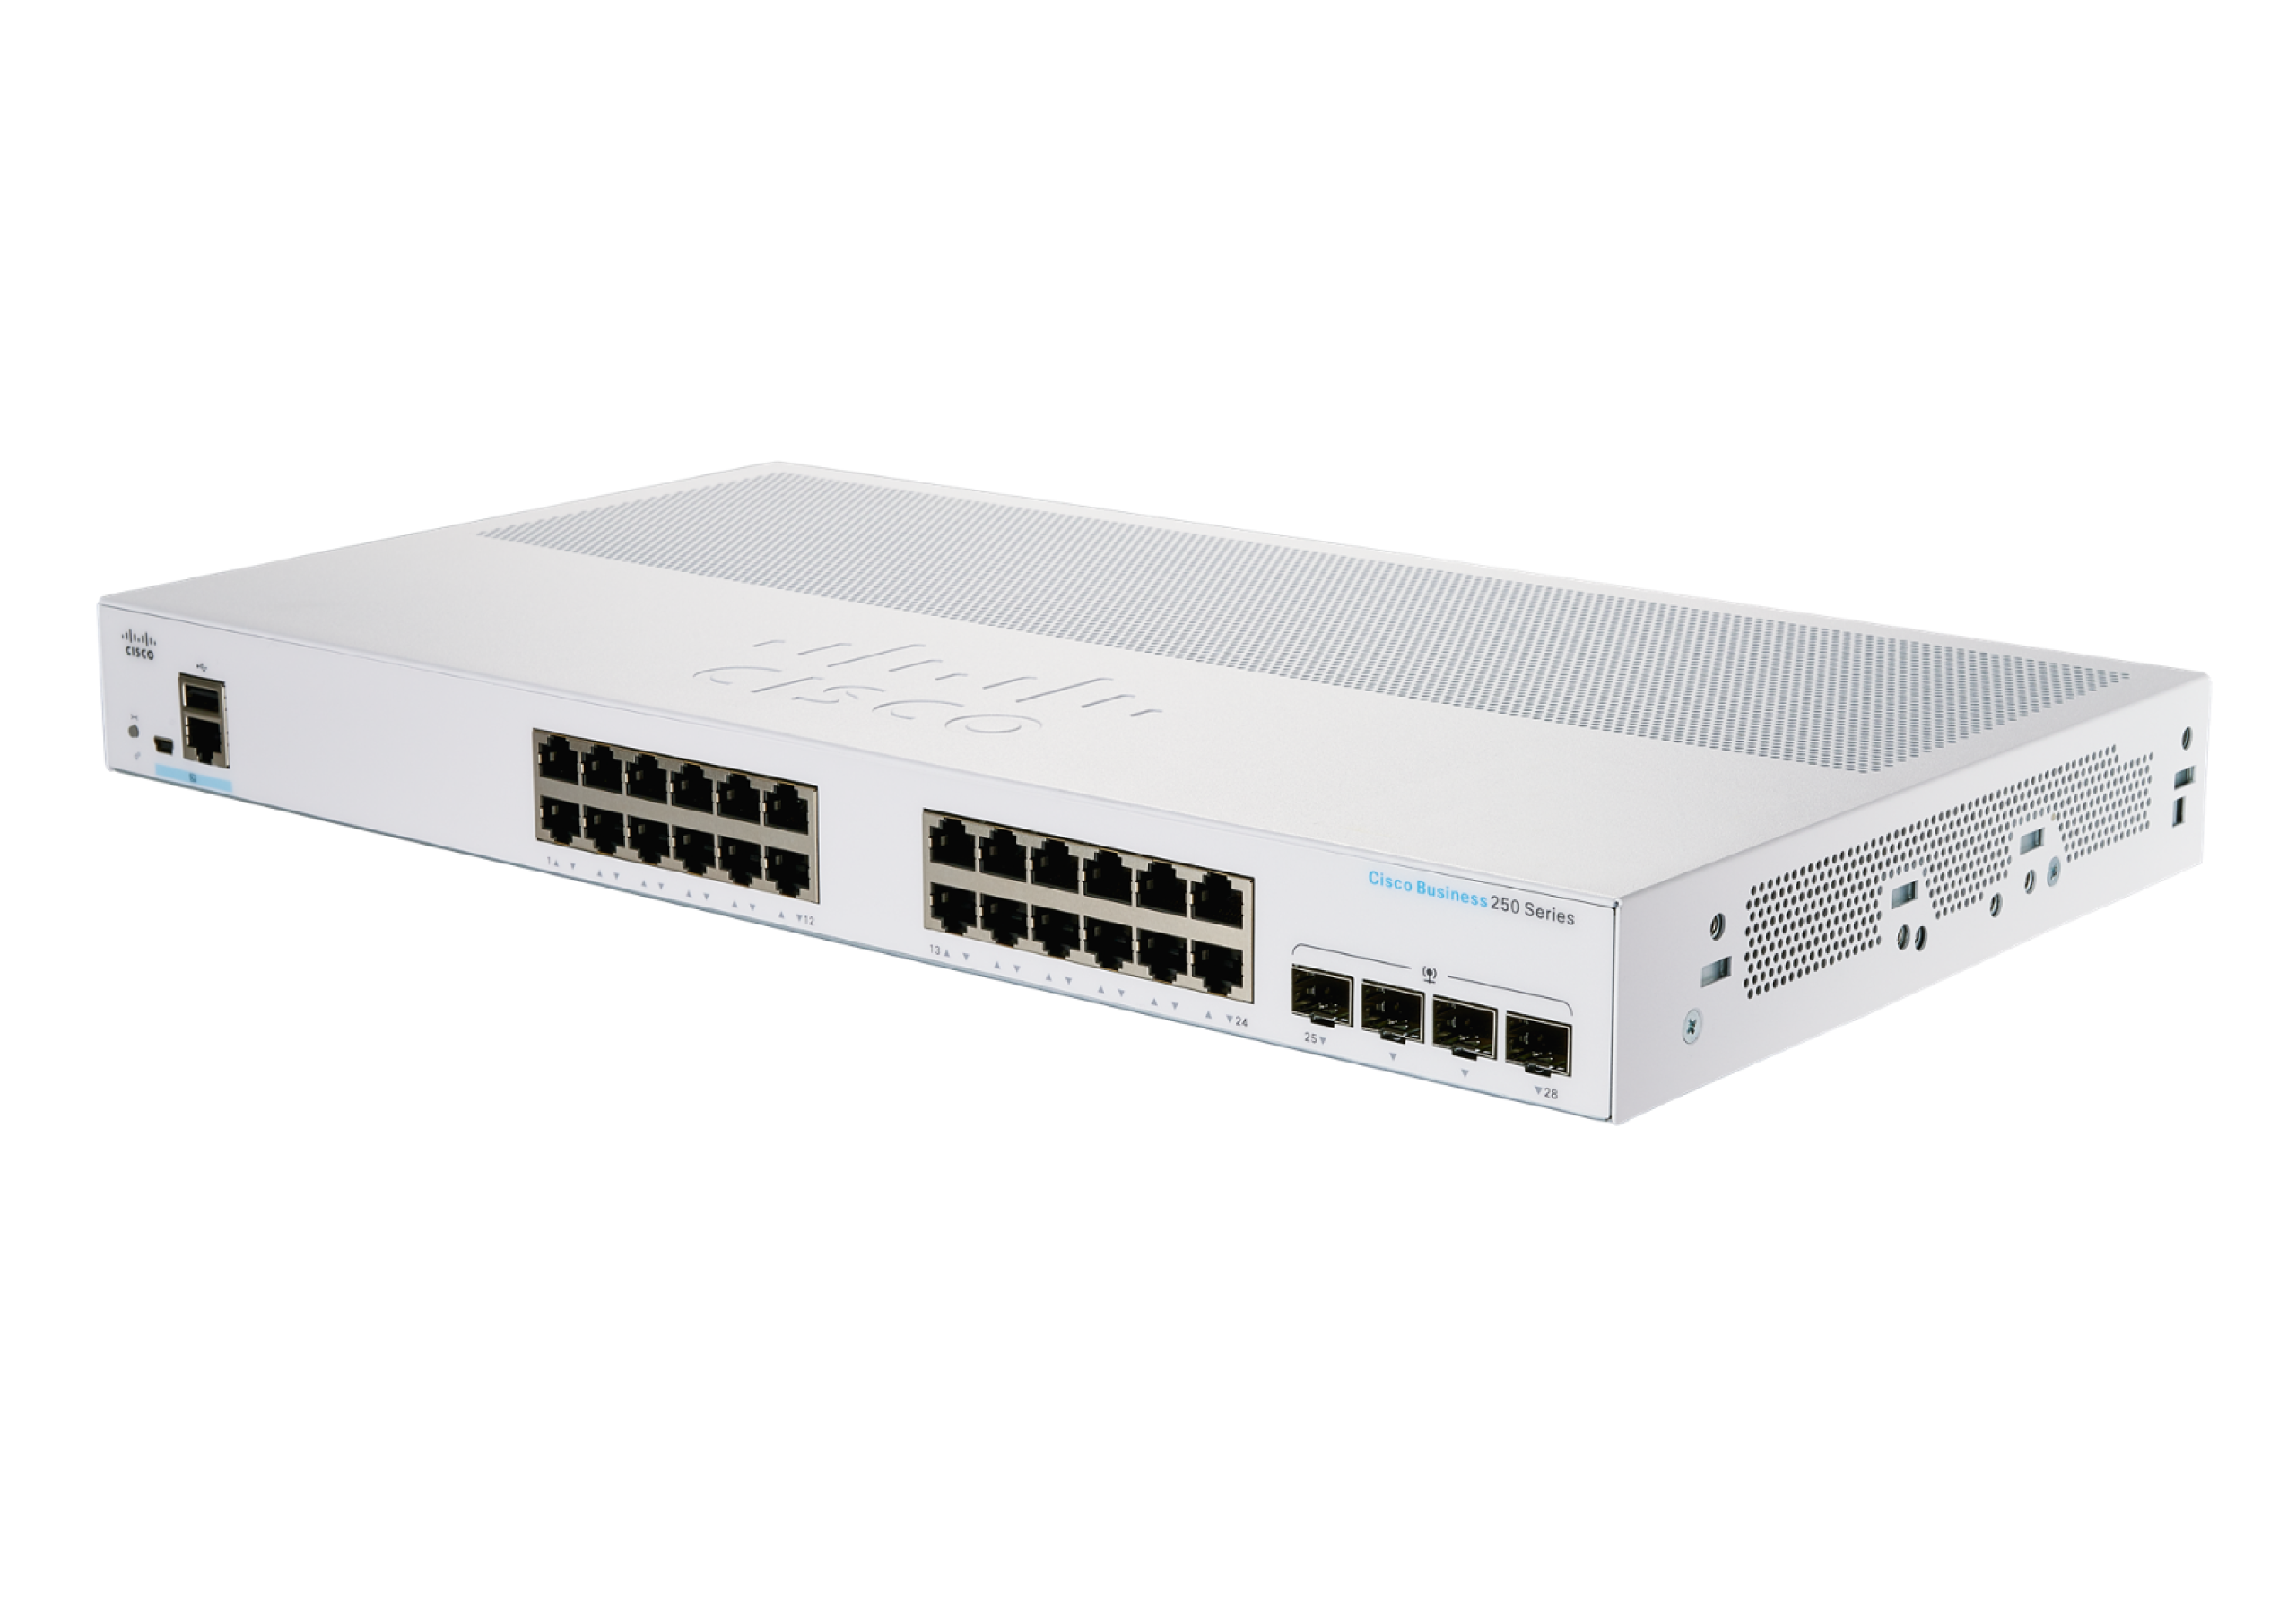 Cisco+250+24+Port+with+4+SFP+L2+Managed+Ethernet+Switch+CBS25024T4GNA